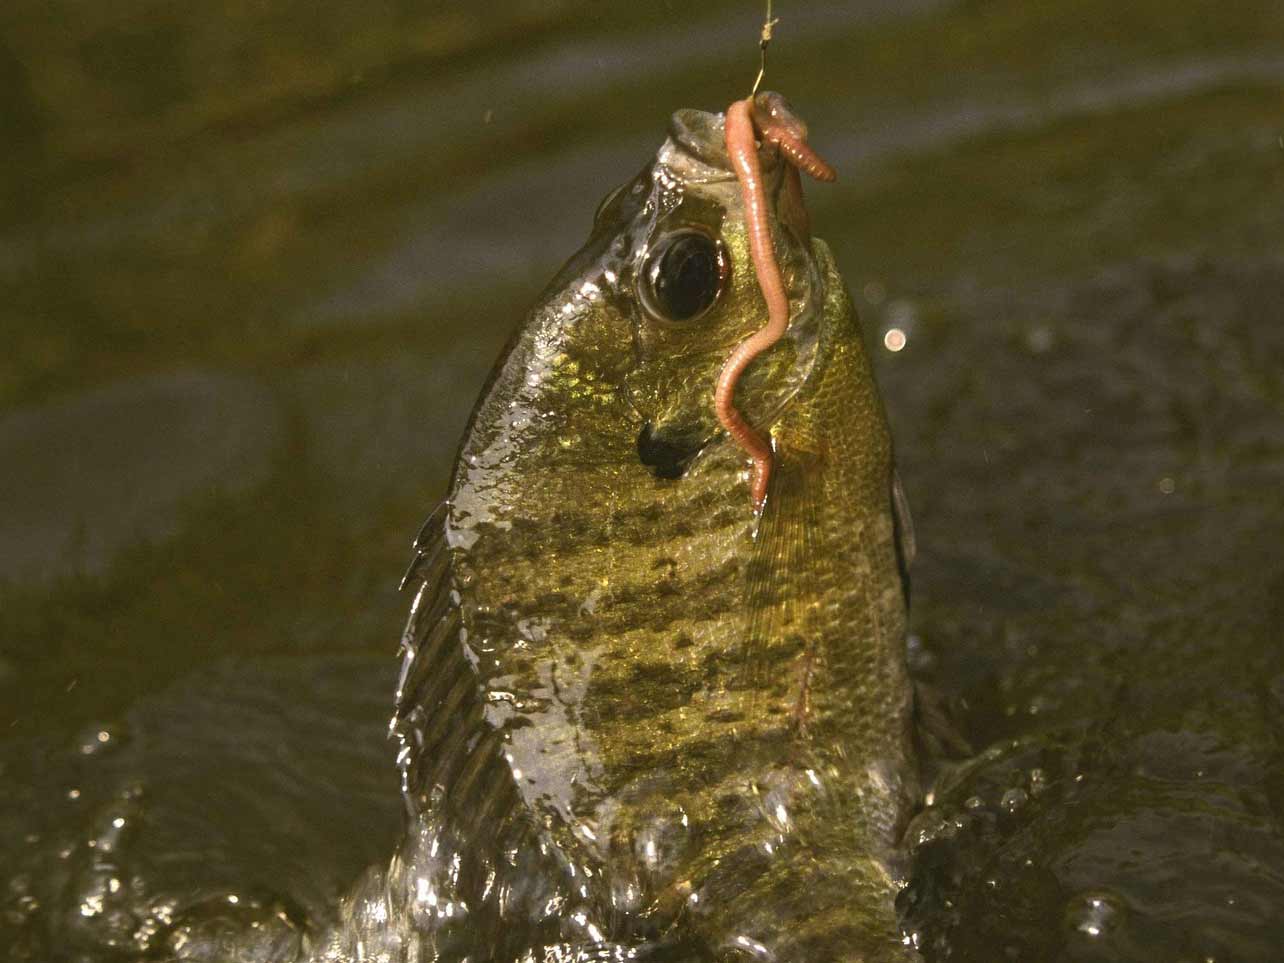 The Beginner's Guide to Catching Your First Fish